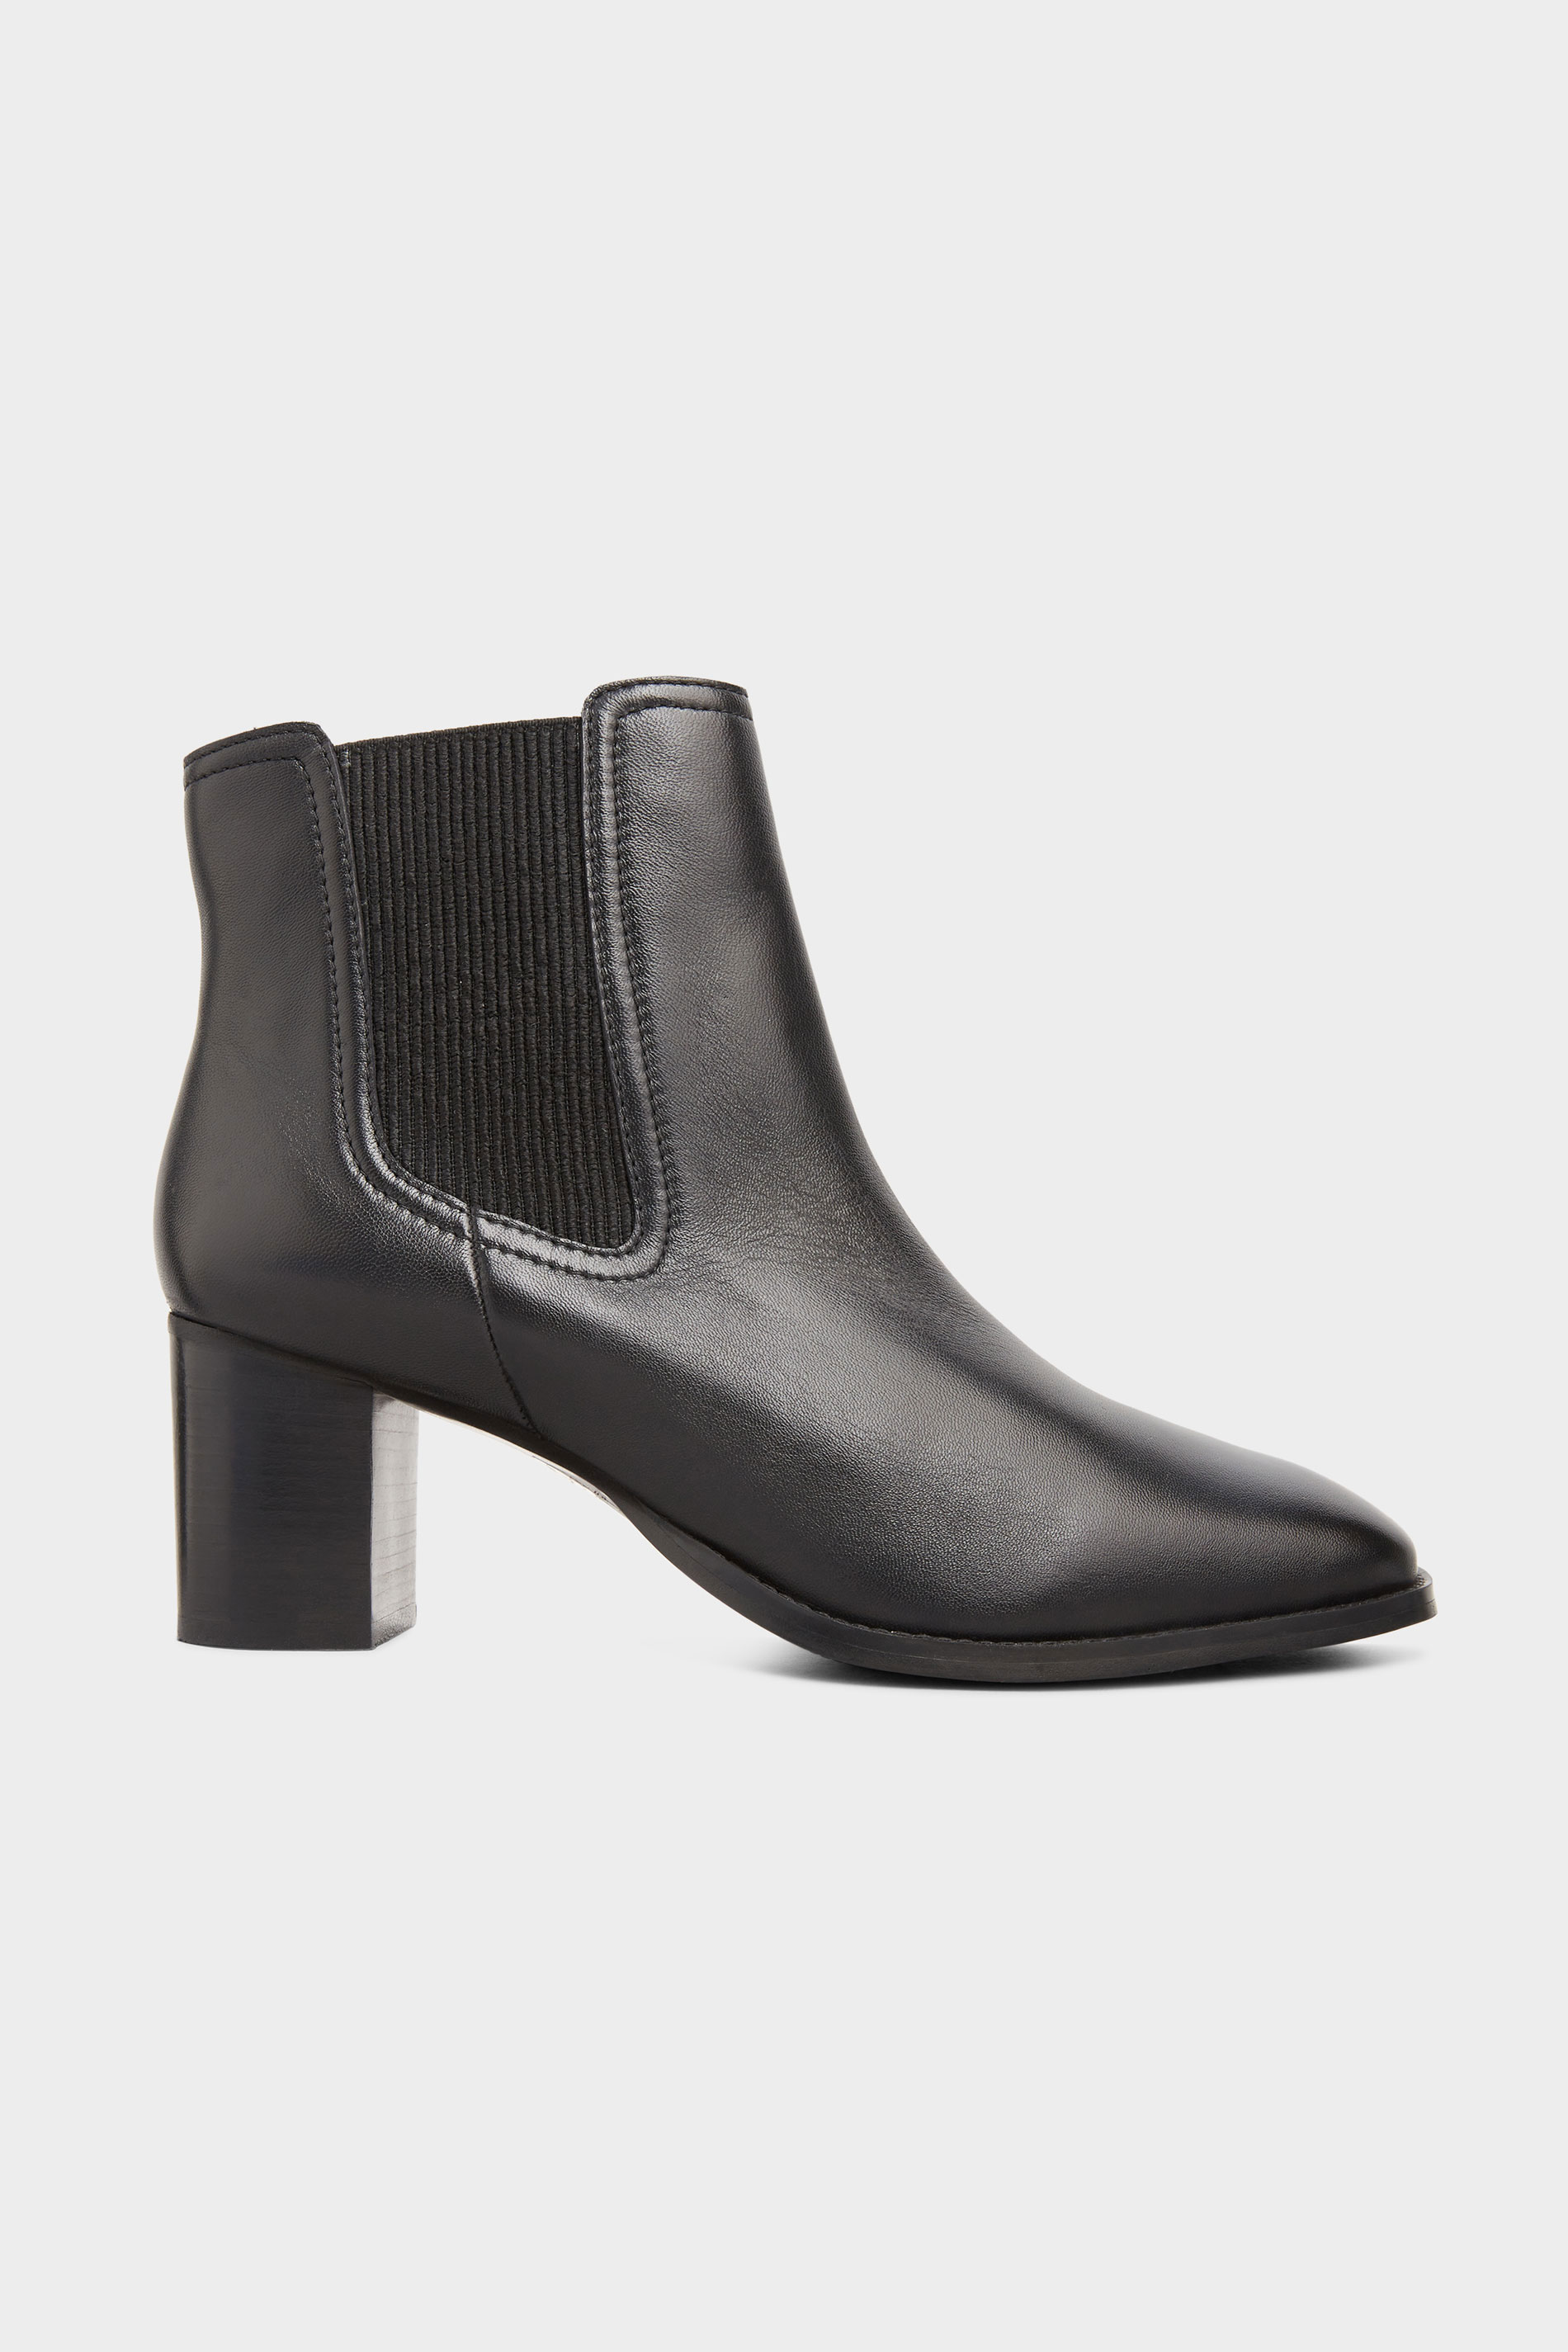 Black Leather Heeled Chelsea Boots In Extra Wide Fit | Long Tall Sally